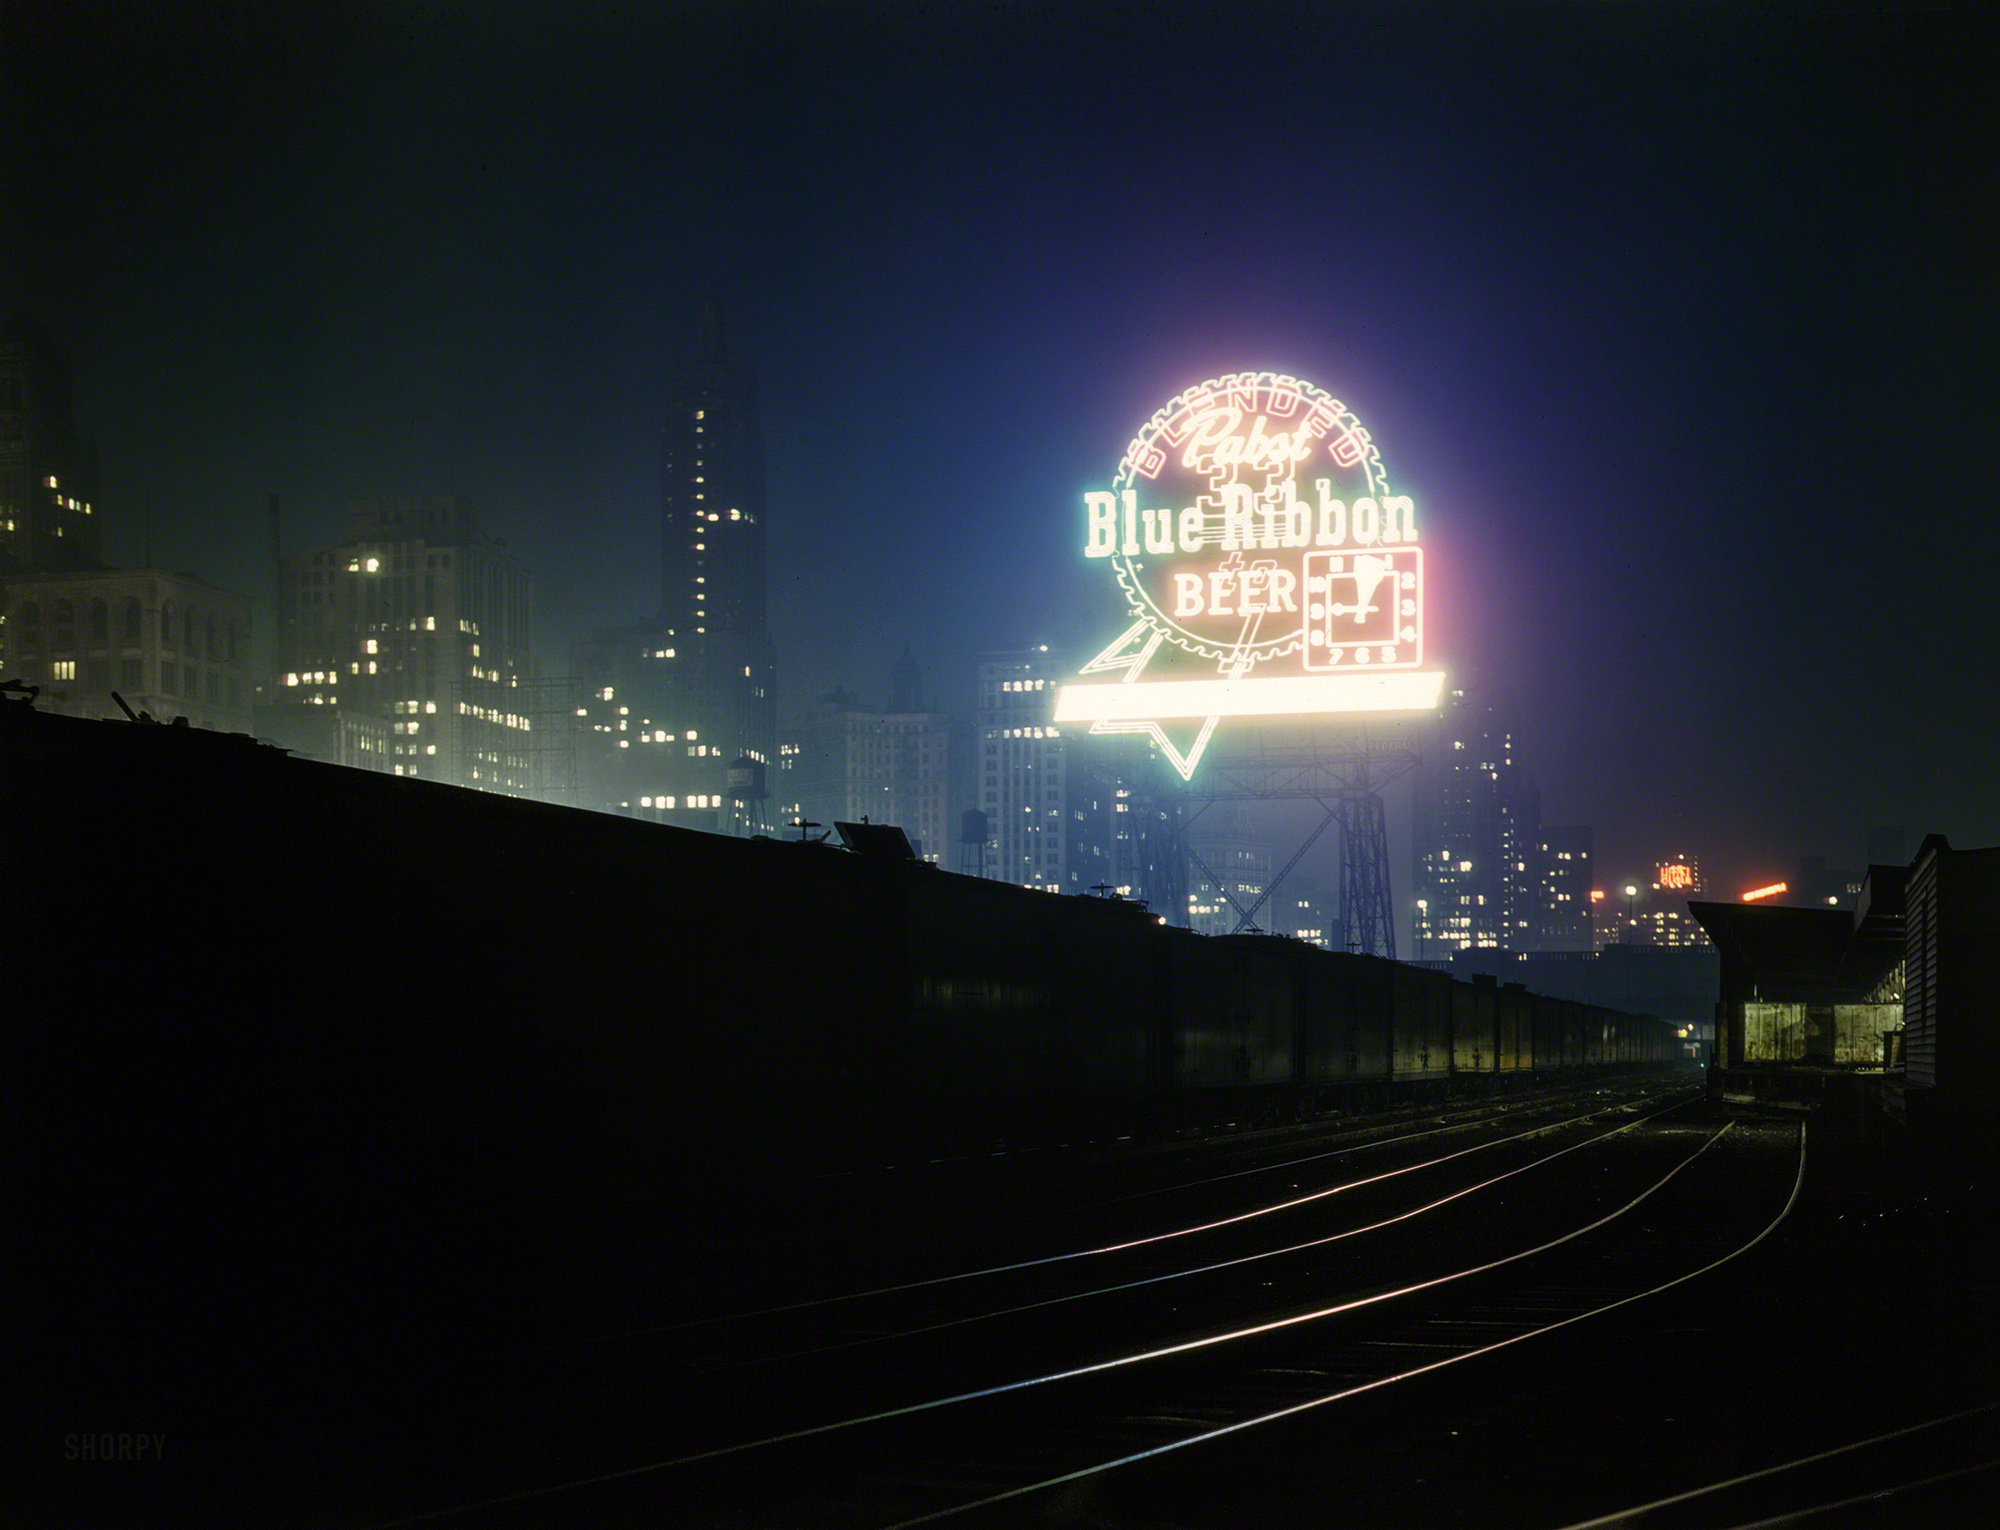 &nbsp; &nbsp; &nbsp; &nbsp; One of our first posts 10 years ago, enlarged and re-restored.
April 1943. "Illinois Central R.R. freight cars in South Water Street terminal, Chicago." Judging by the clock, this was a five-minute time exposure. Kodachrome transparency by Jack Delano for the Office of War Information. View full size.